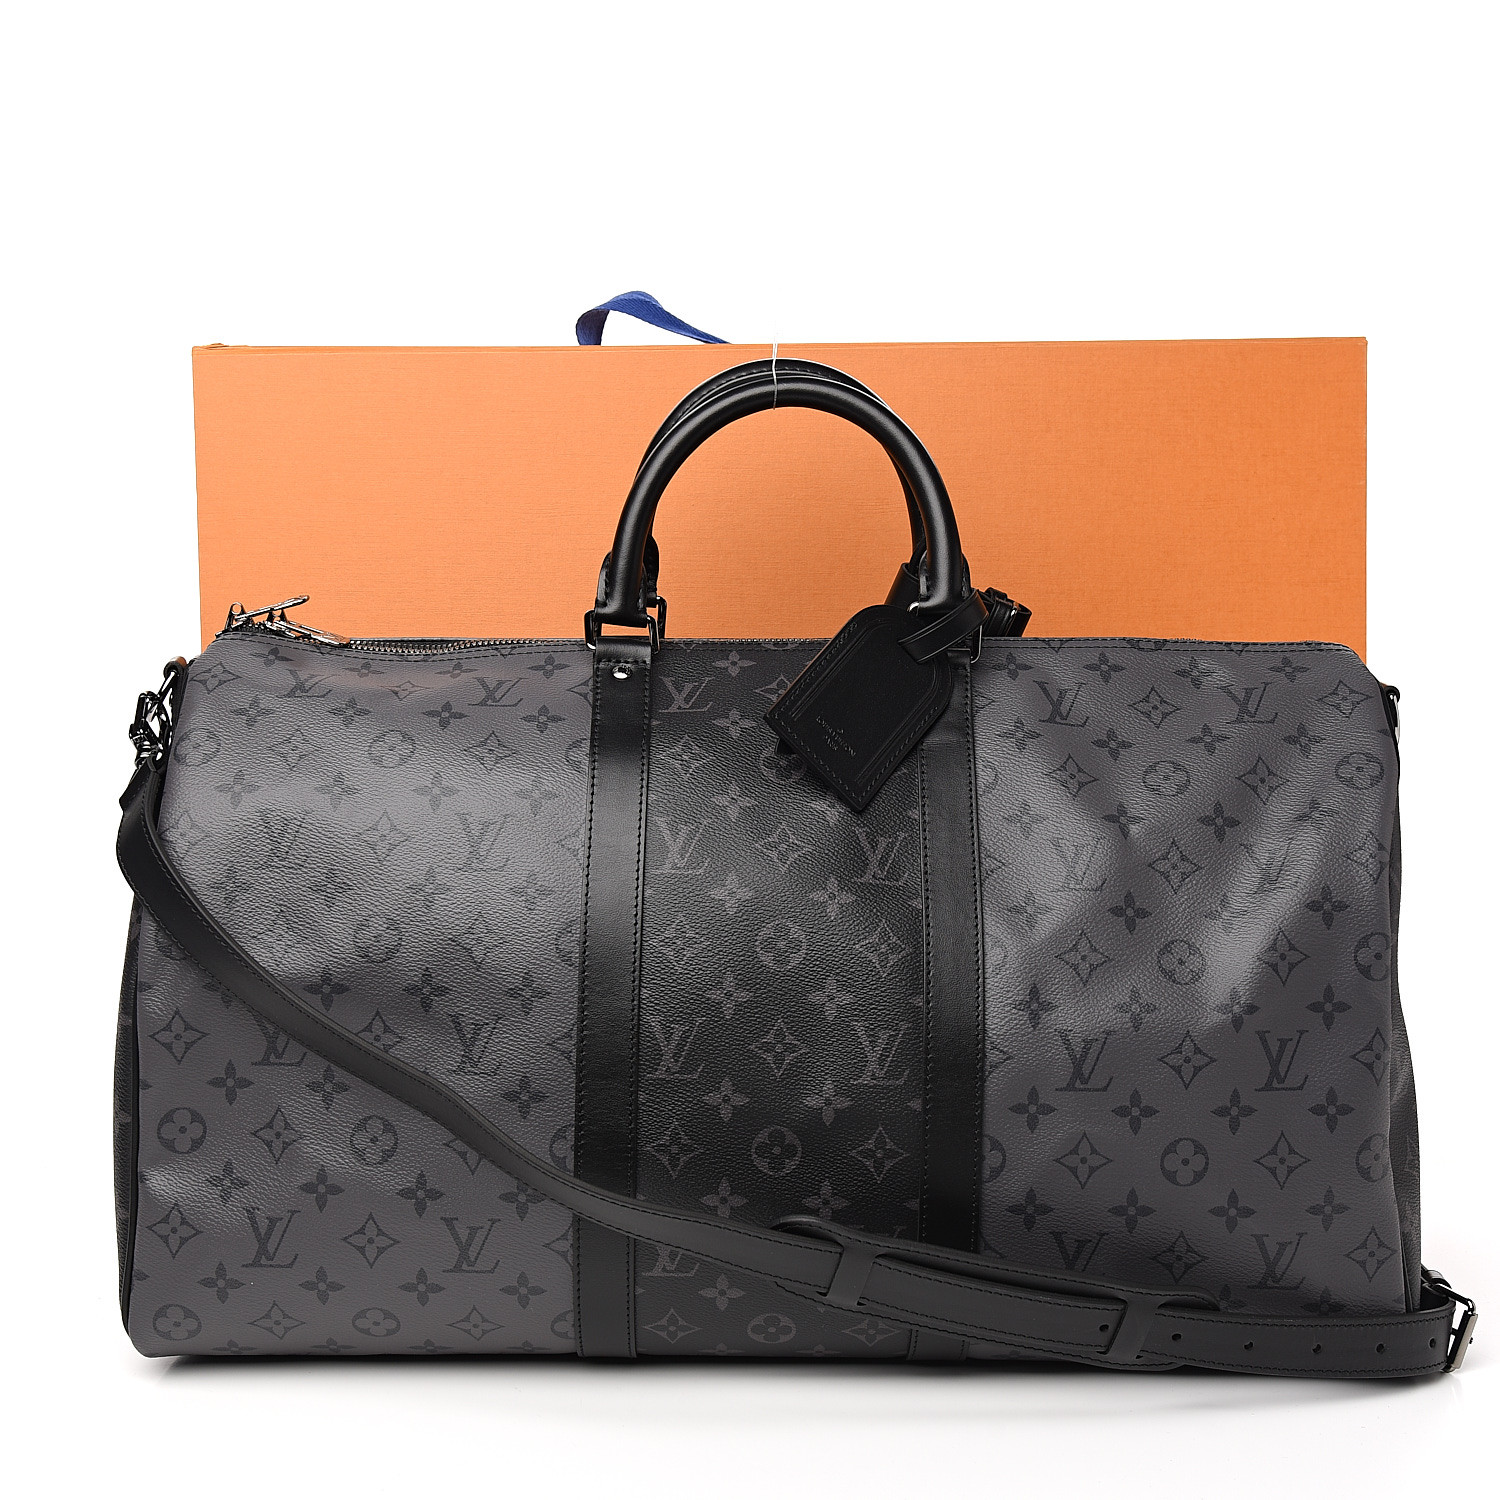 Louis Vuitton Keepall 50 Monogram Eclipse Reverse Review and Try